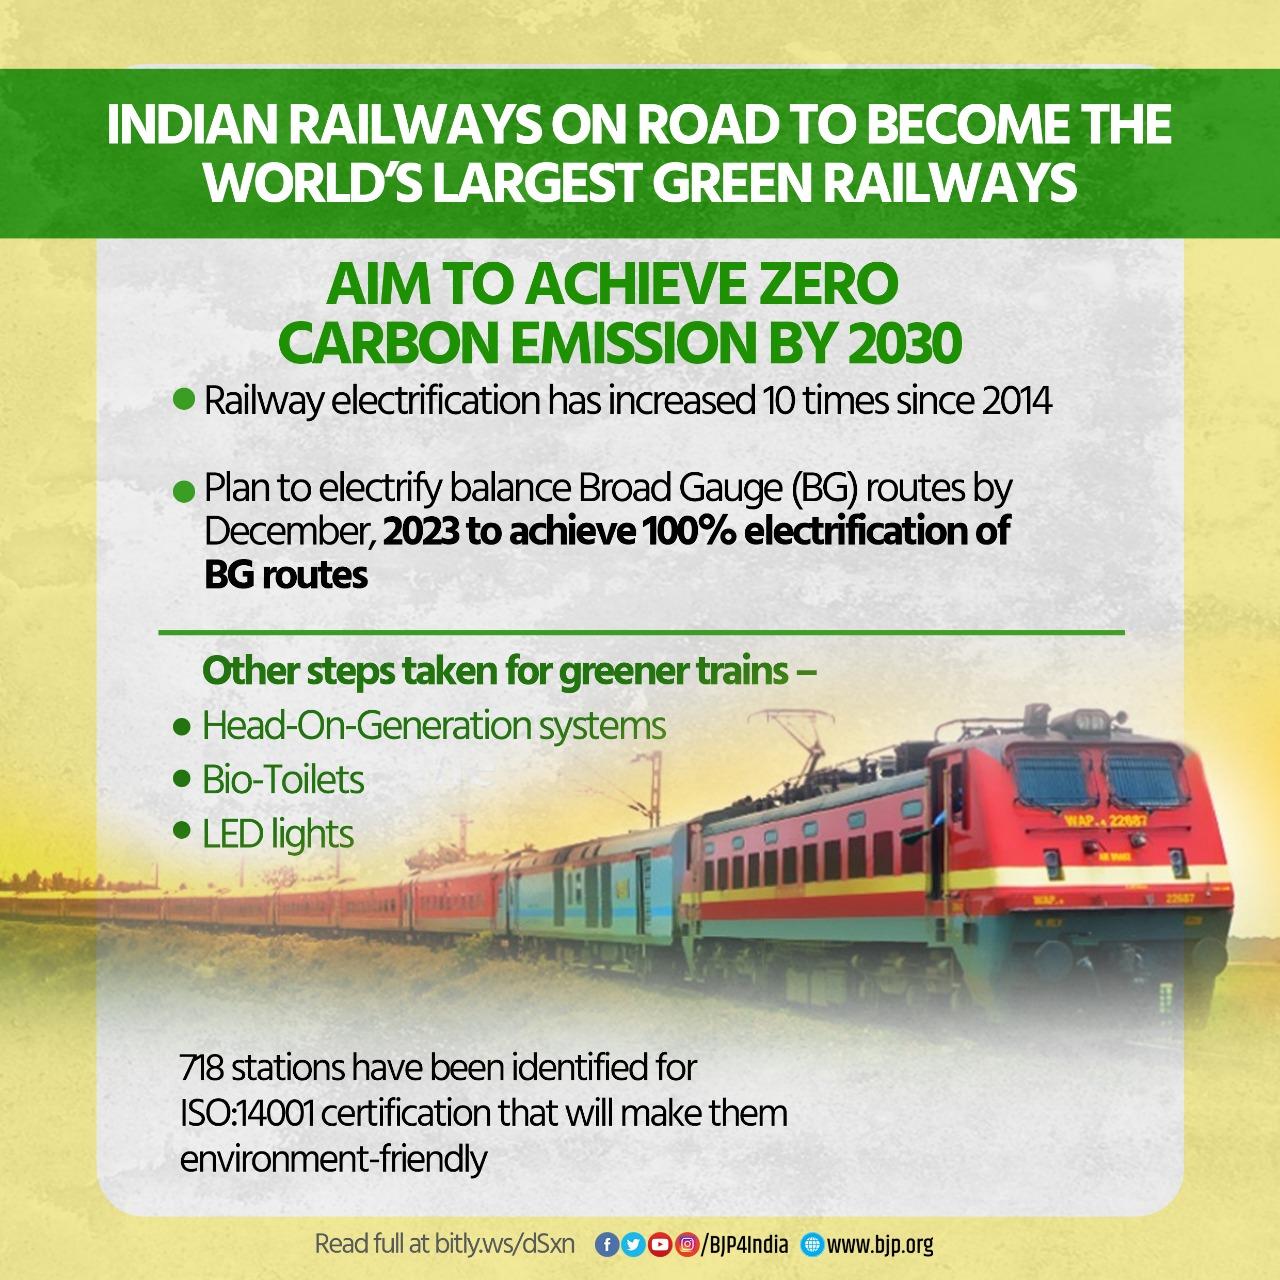 BJP on Twitter: "Greener Railways, Greener India. Railway electrification has increased 10 times since 2014 with an aim to achieve 100% electrification of Broad Gauge routes by 2023. https://t.co/JOA0pXBRNU" / Twitter